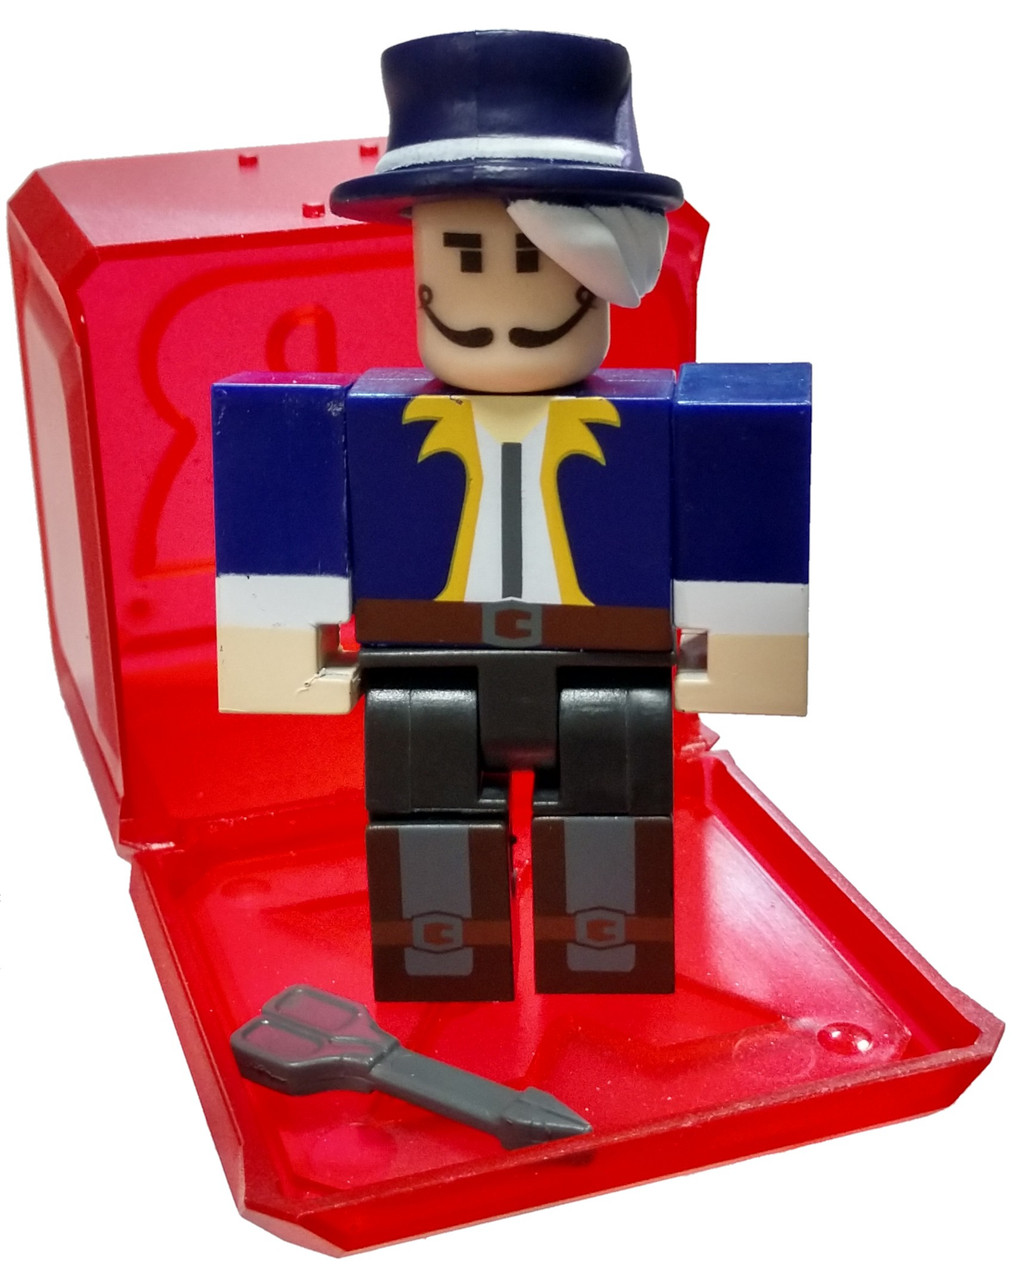 Roblox Celebrity Collection Series 5 Vesteria Barber S 3 Mini Figure With Red Cube And Online Code Loose Jazwares Toywiz - thegamer101 draw roblox characters collector guide